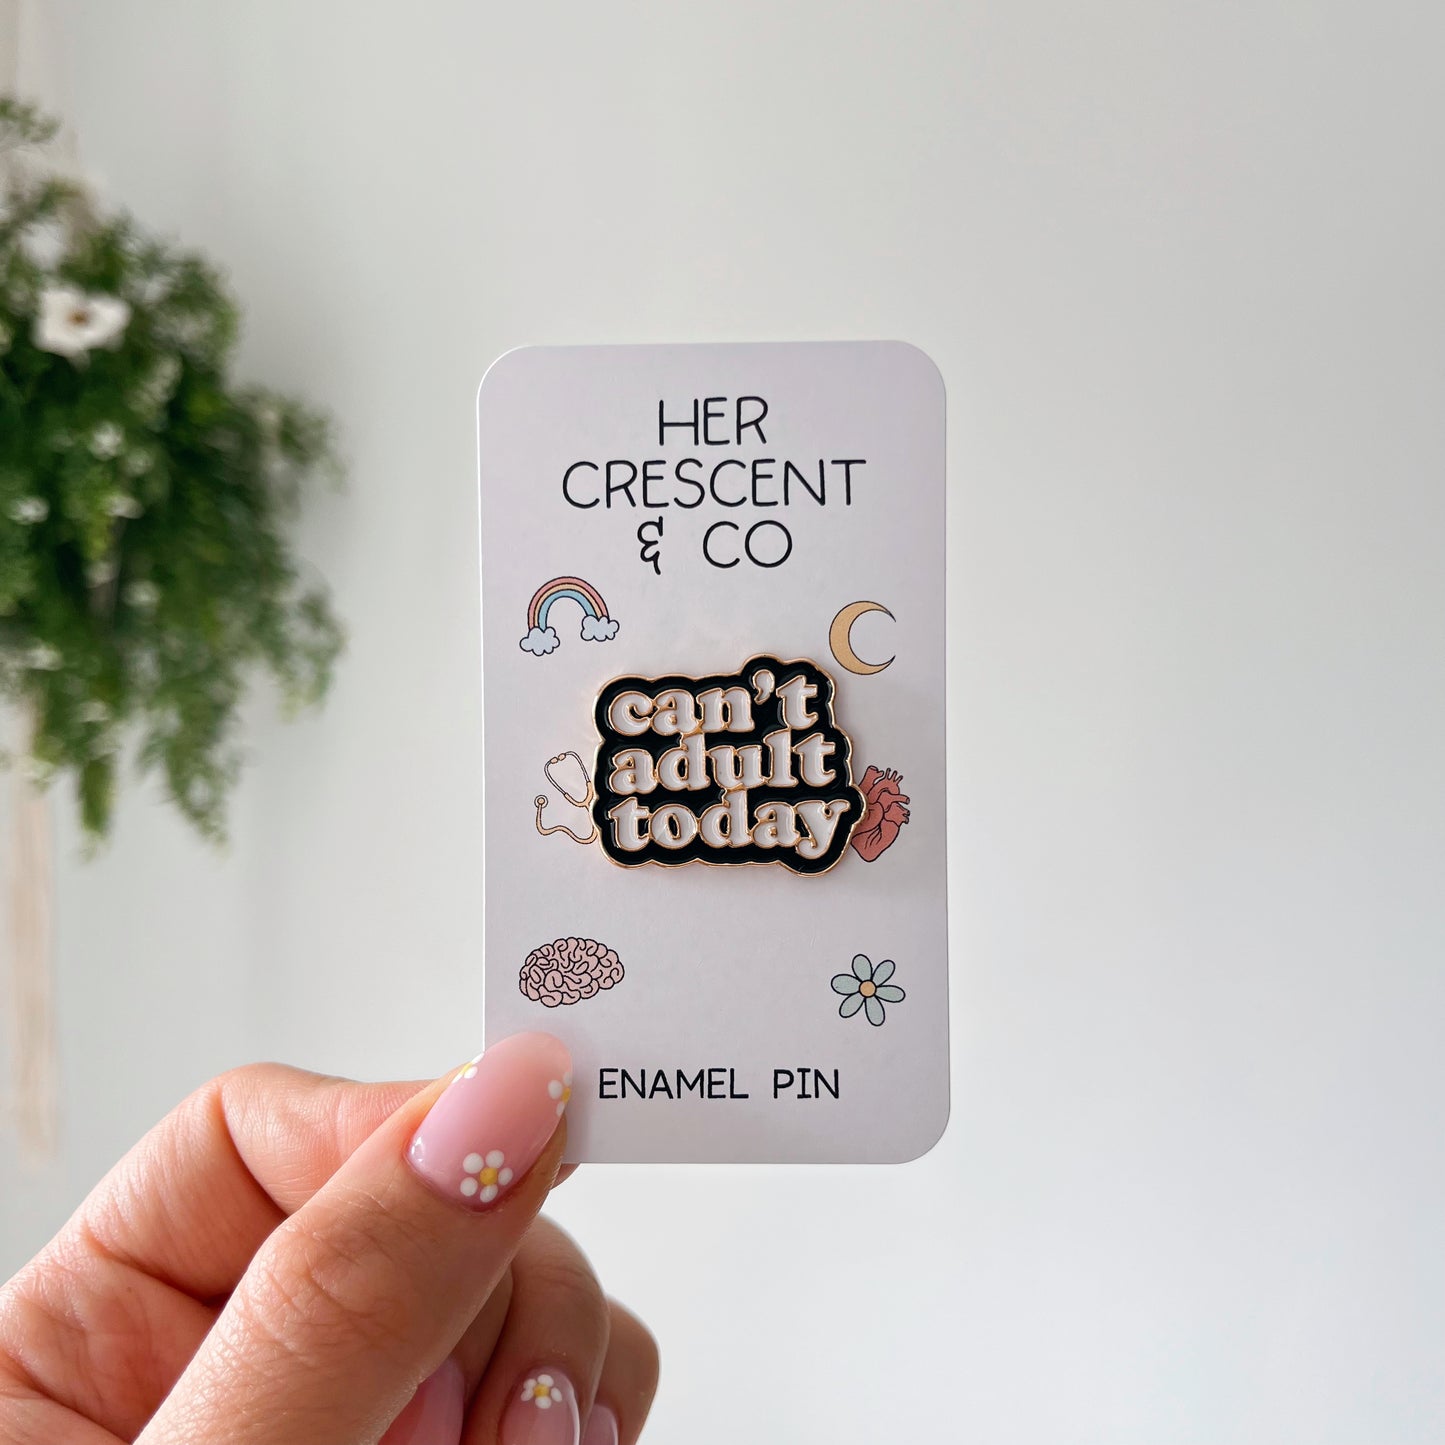 Can't Adult Today Enamel Pin